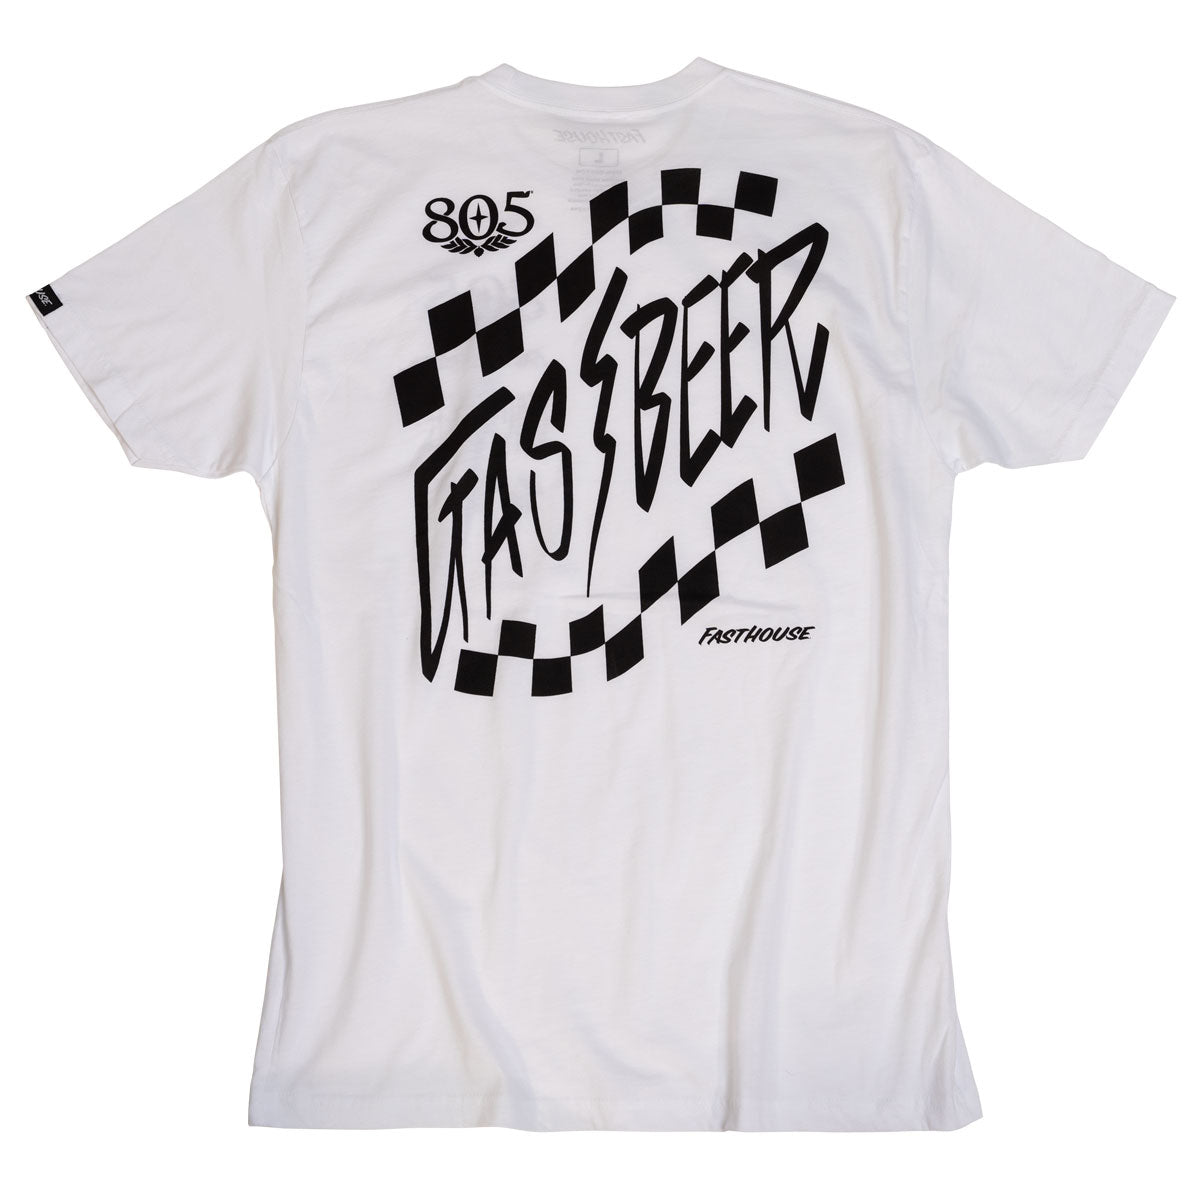 805 Gassed Up Tee - White